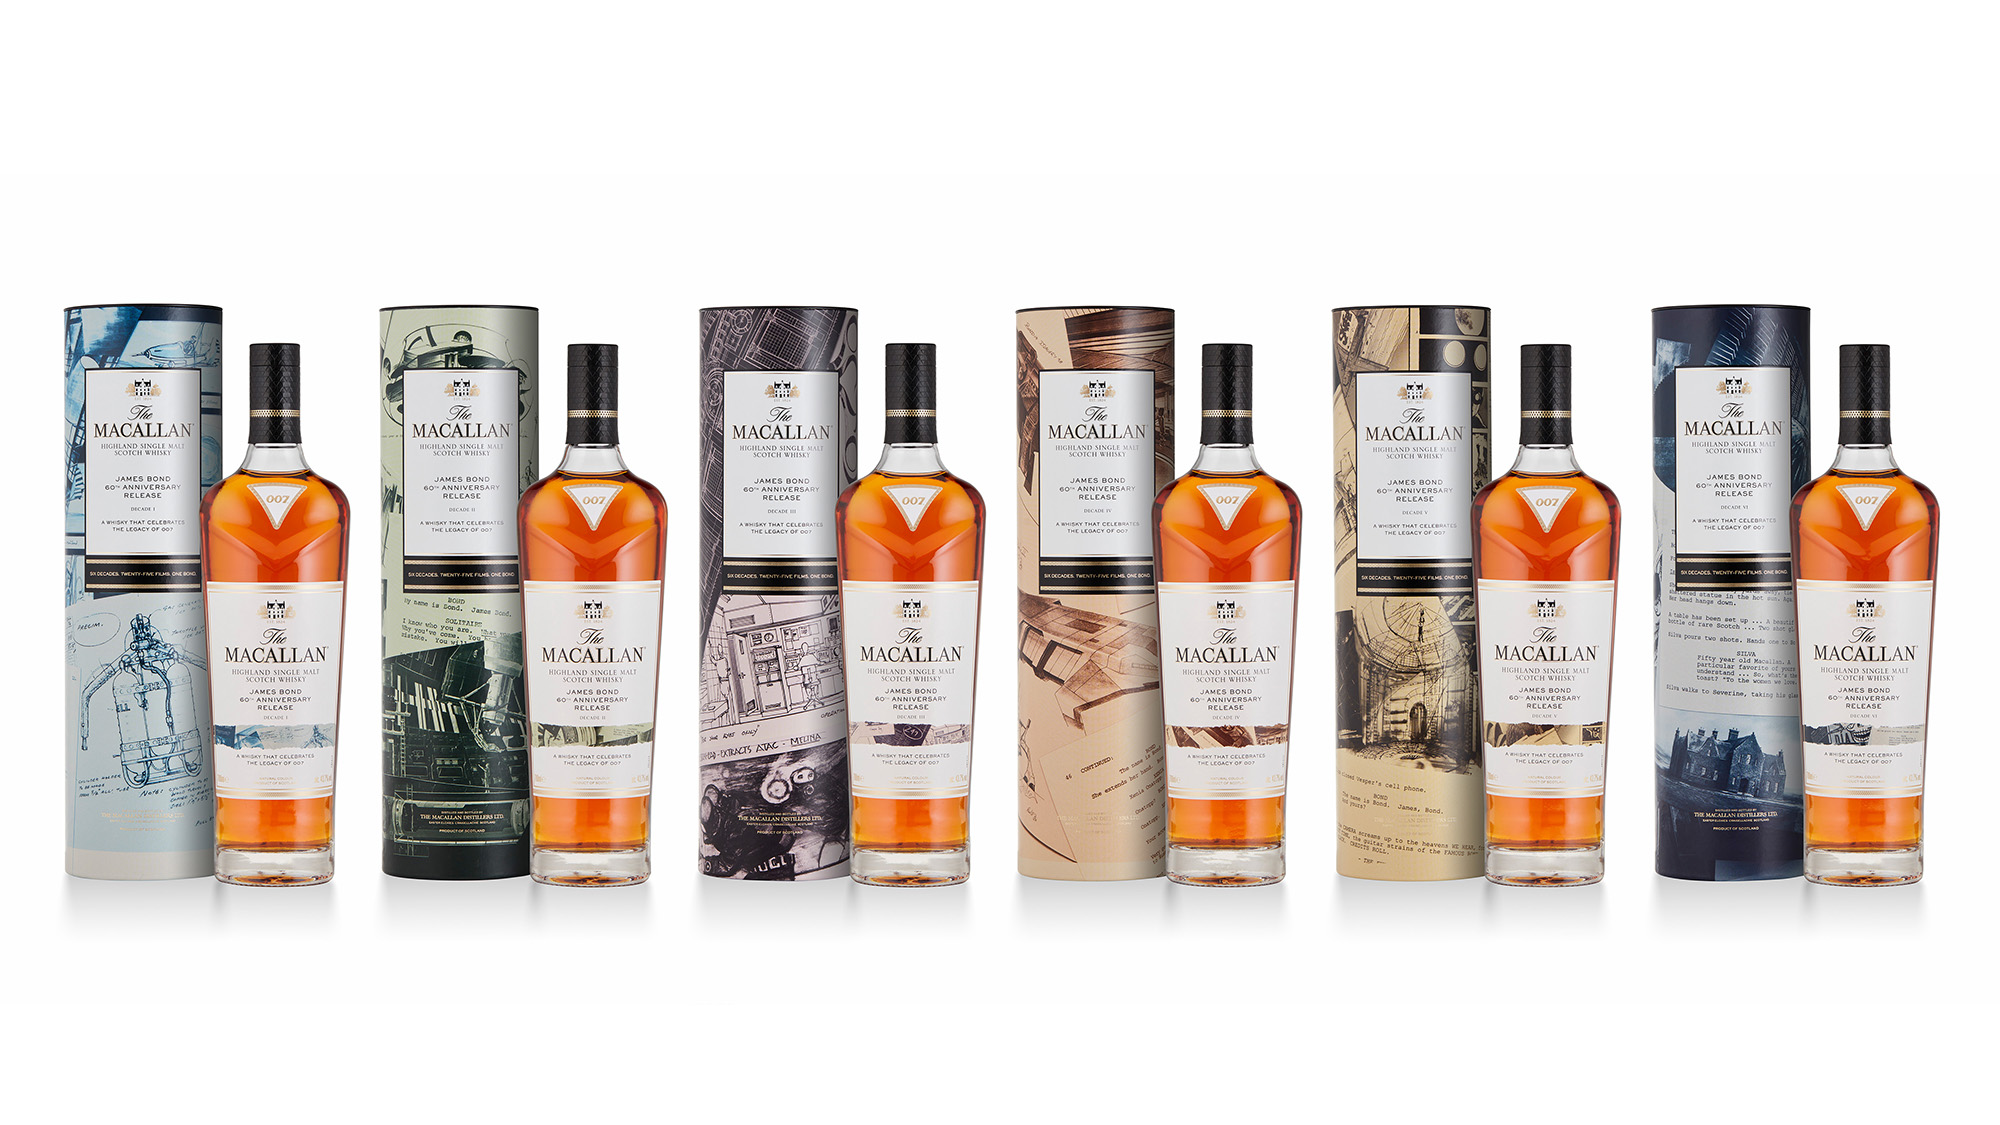 The Macallan James Bond 60th Anniversary Release Collection whisky bottles and packs